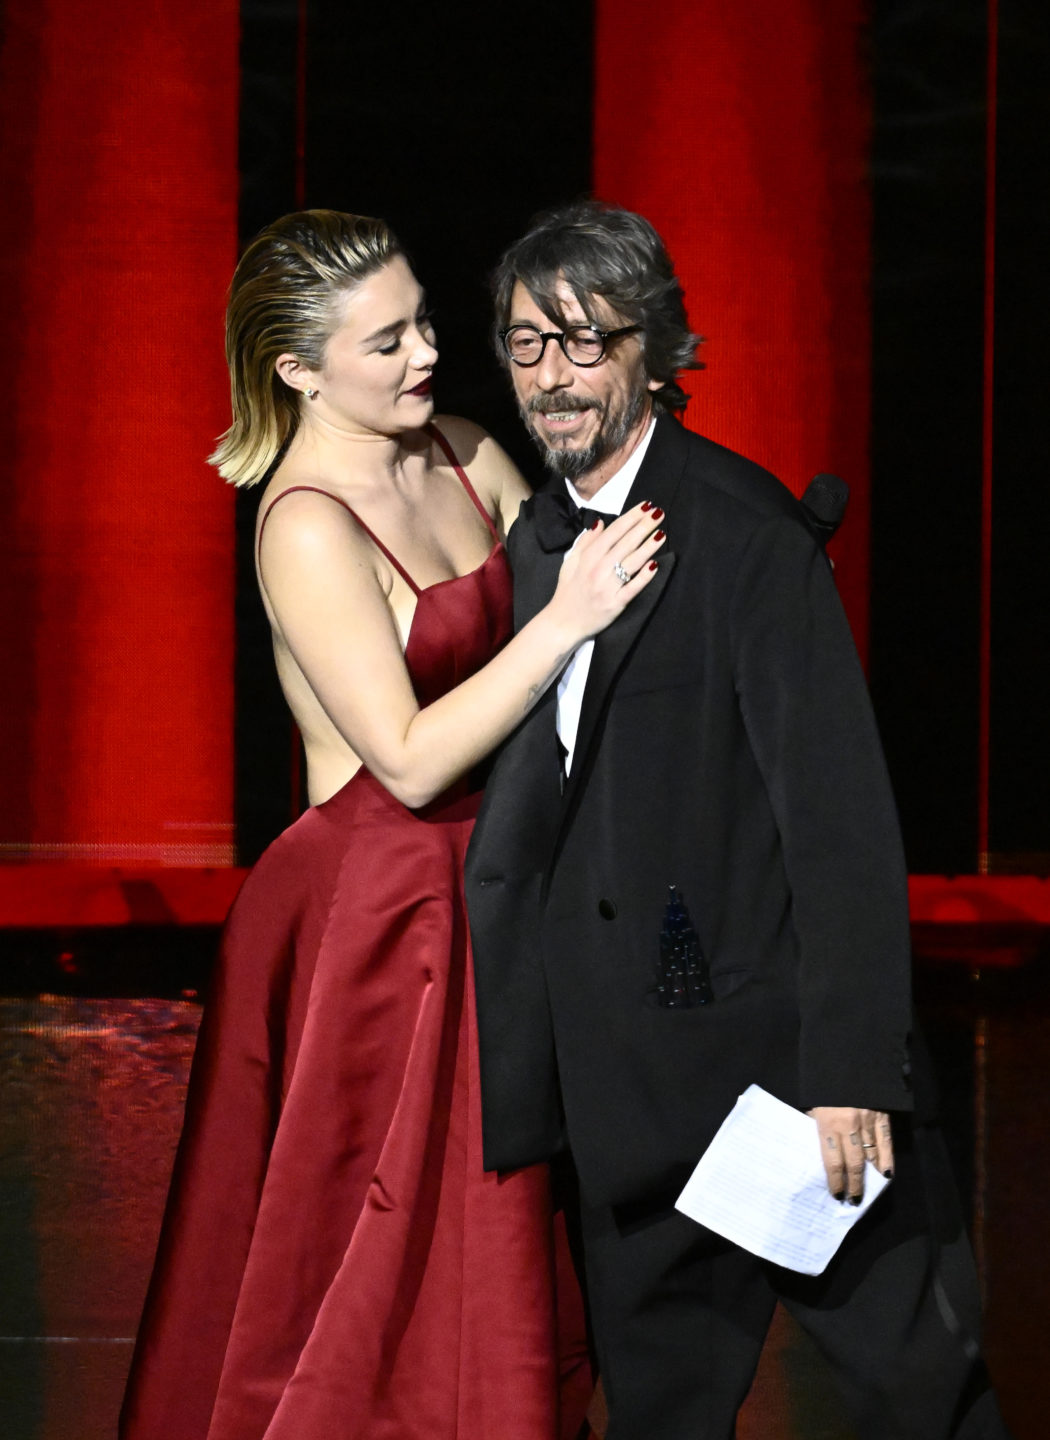 LONDON, ENGLAND – DECEMBER 05: Florence Pugh presents the Designer Of The Year award to Pierpaolo Piccioli for Valentino on stage during The Fashion Awards 2022 at the Royal Albert Hall on December 05, 2022 in London, England. (Photo by Gareth Cattermole/BFC/Getty Images for BFC)